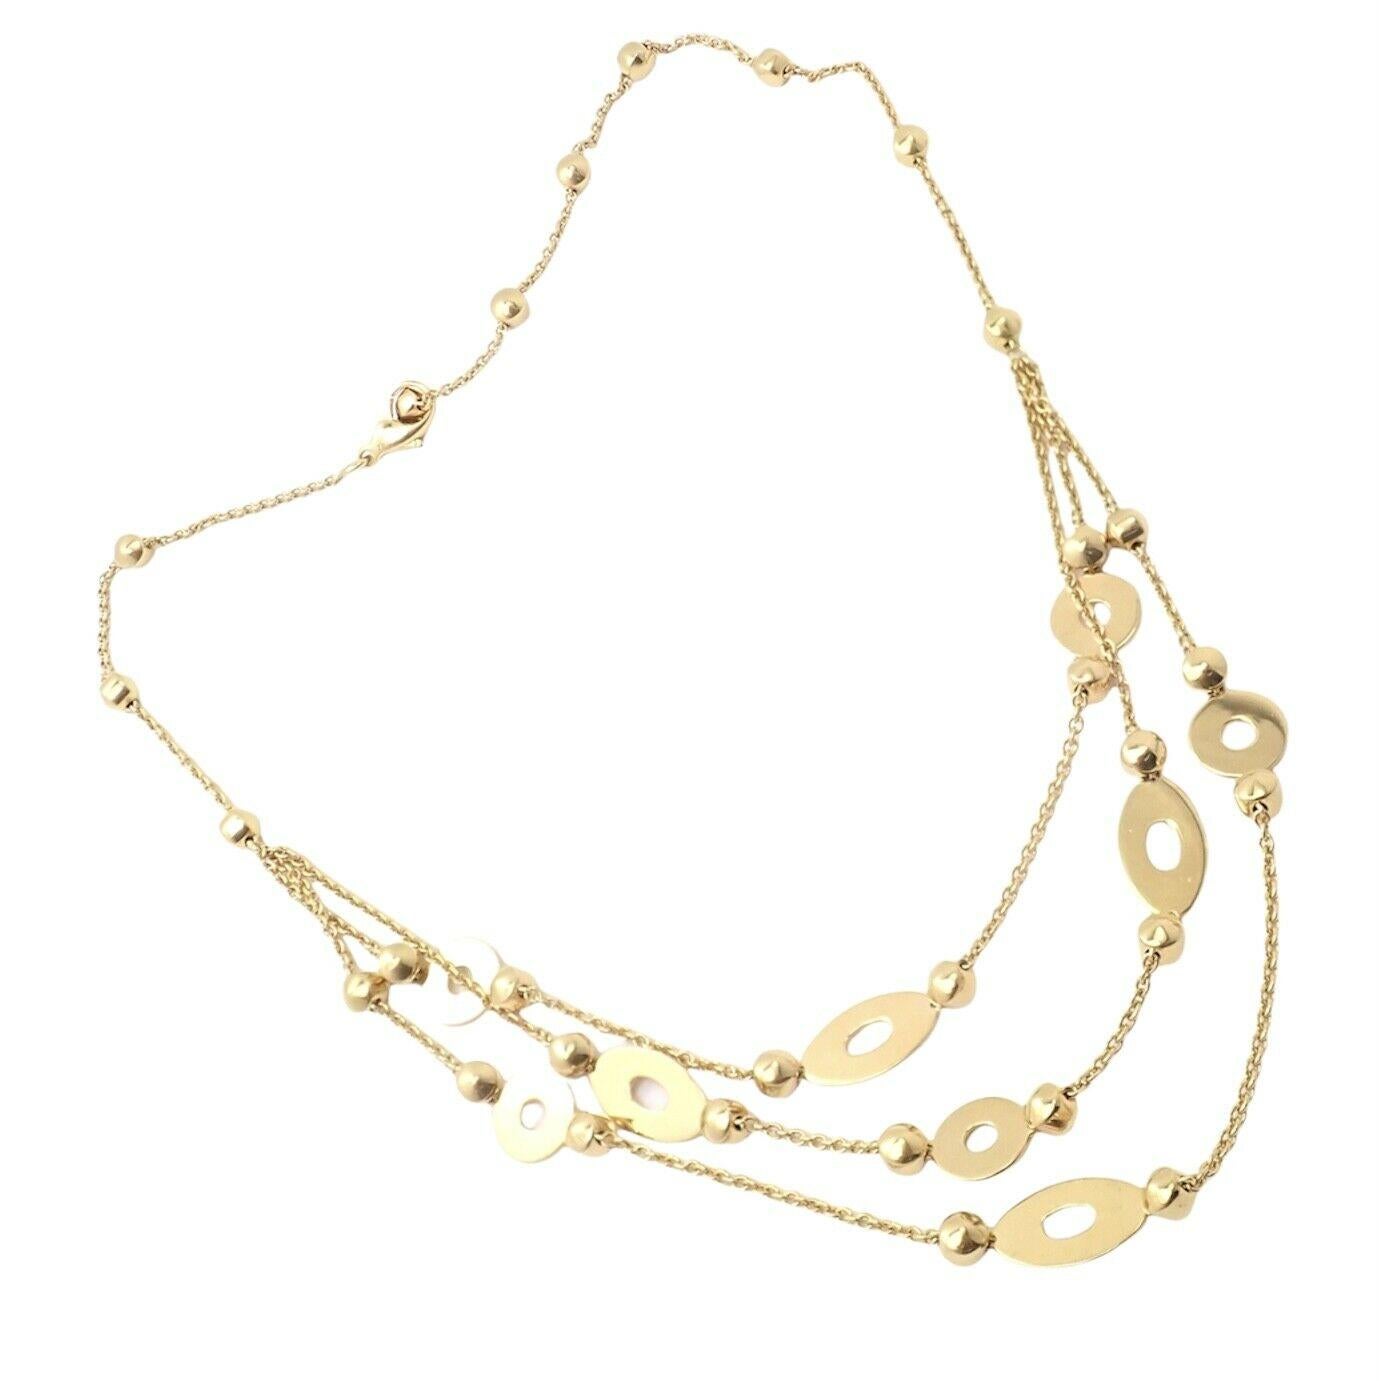 18k Yellow Gold Lucea Three Row Necklace by Bulgari.
Details:
Length: Adjustable: 18